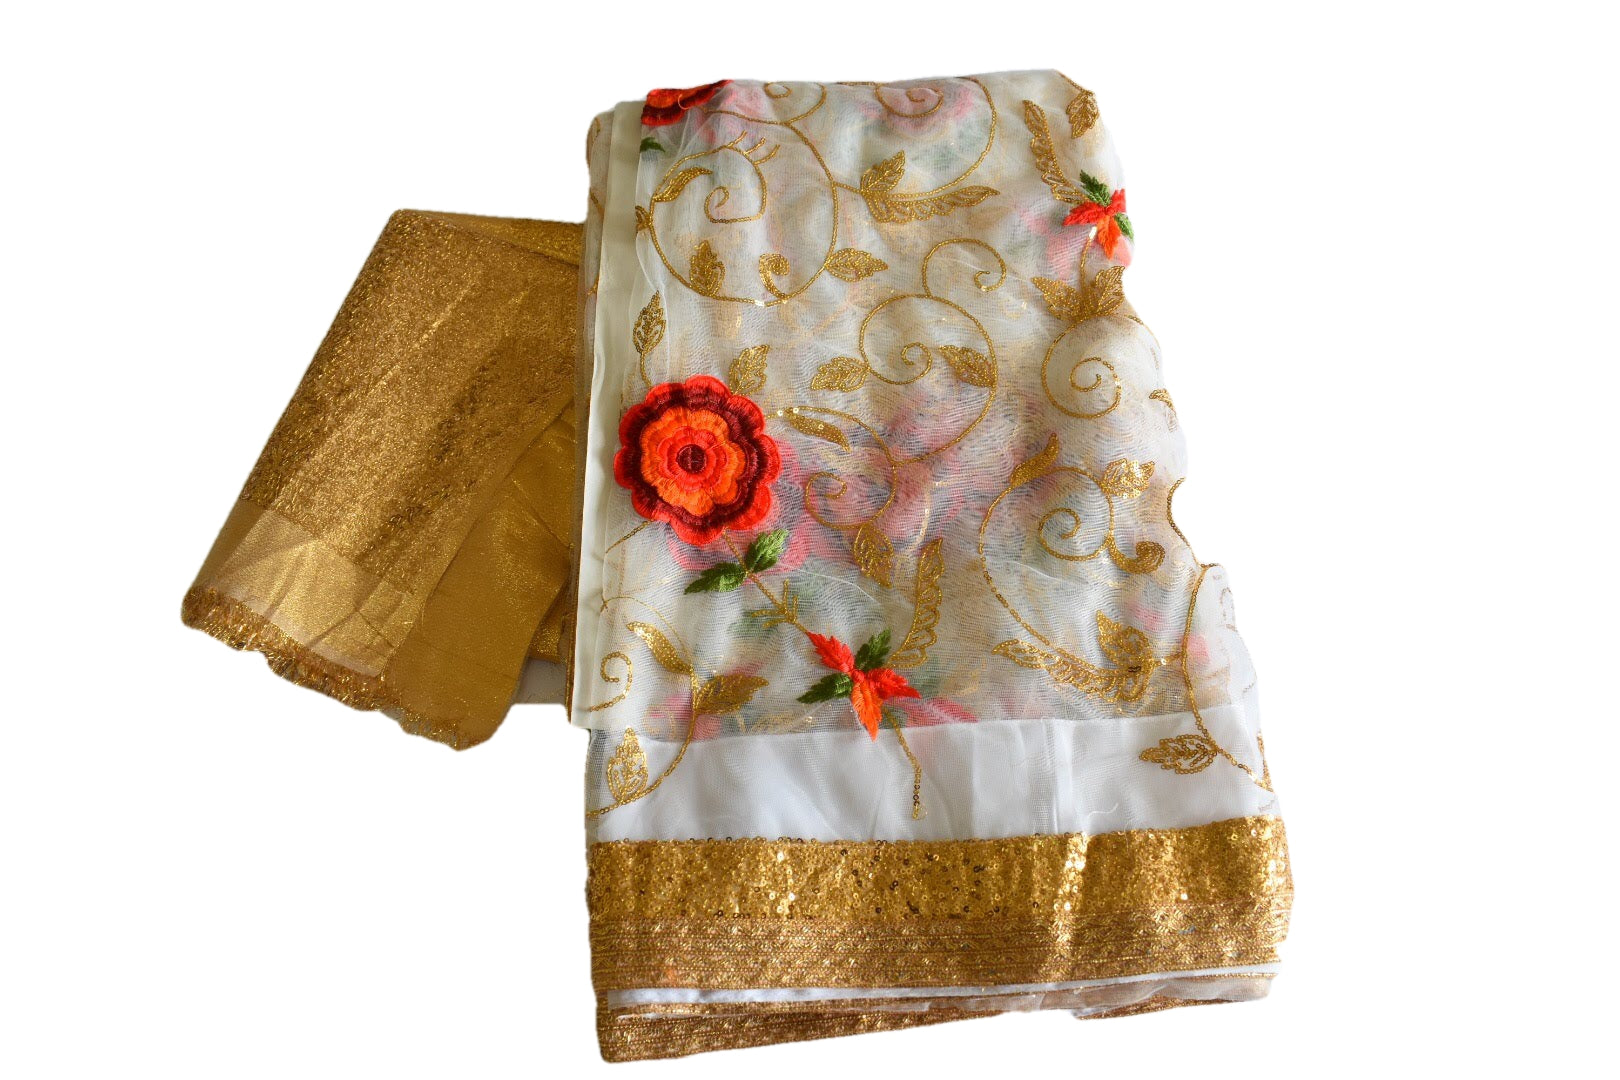 White and Red Color - Pure Chiffon Net Embroidered Saree - Shiny Gold Sequin Border And Floral Pattern